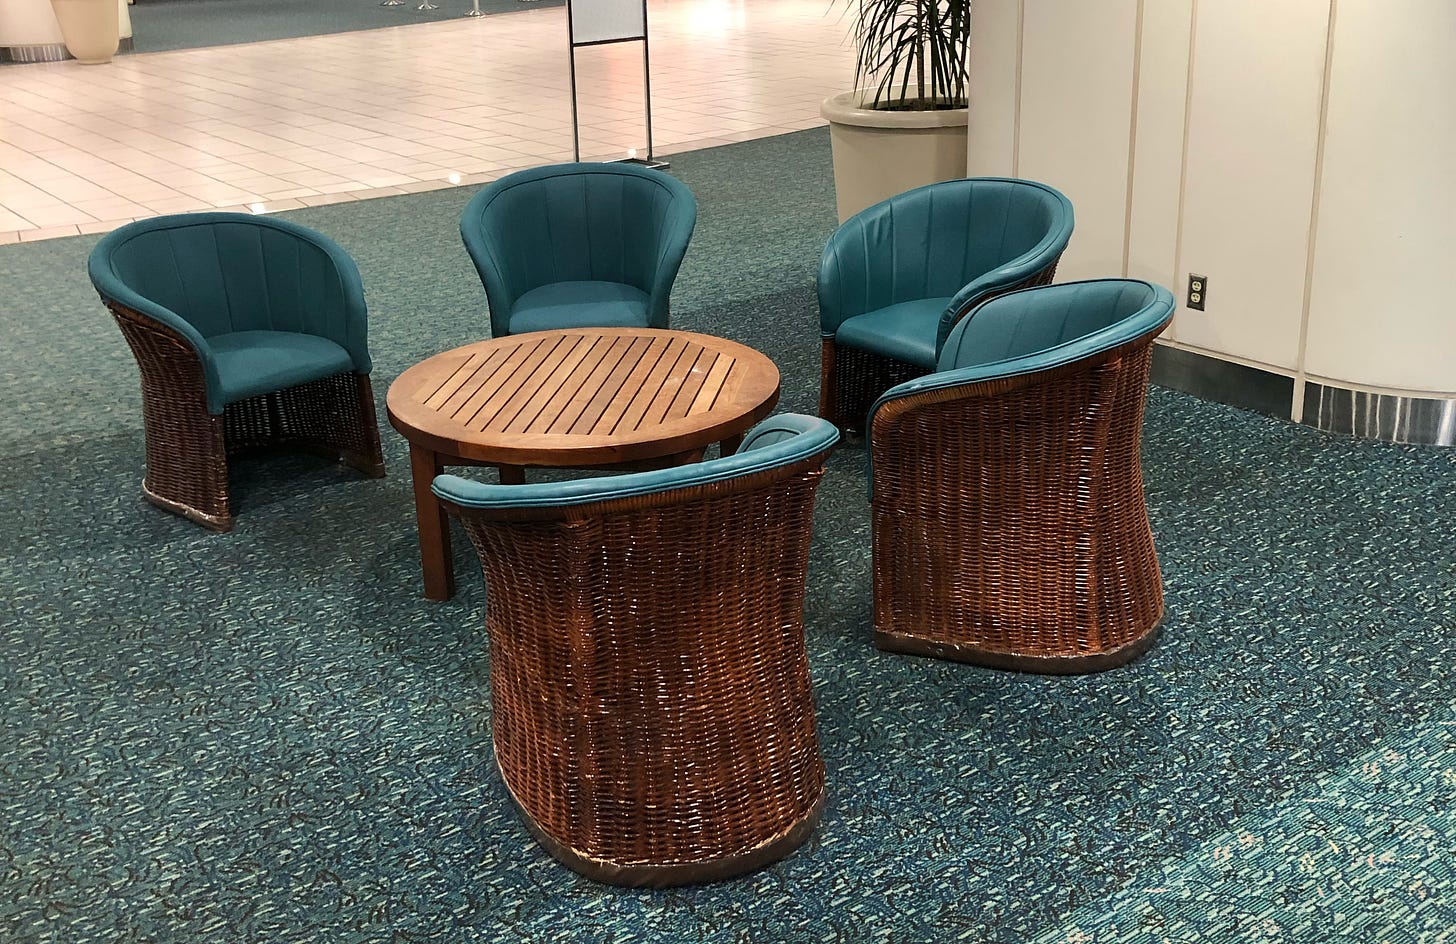 a set of five green wicker chairs surrounding a small wood table